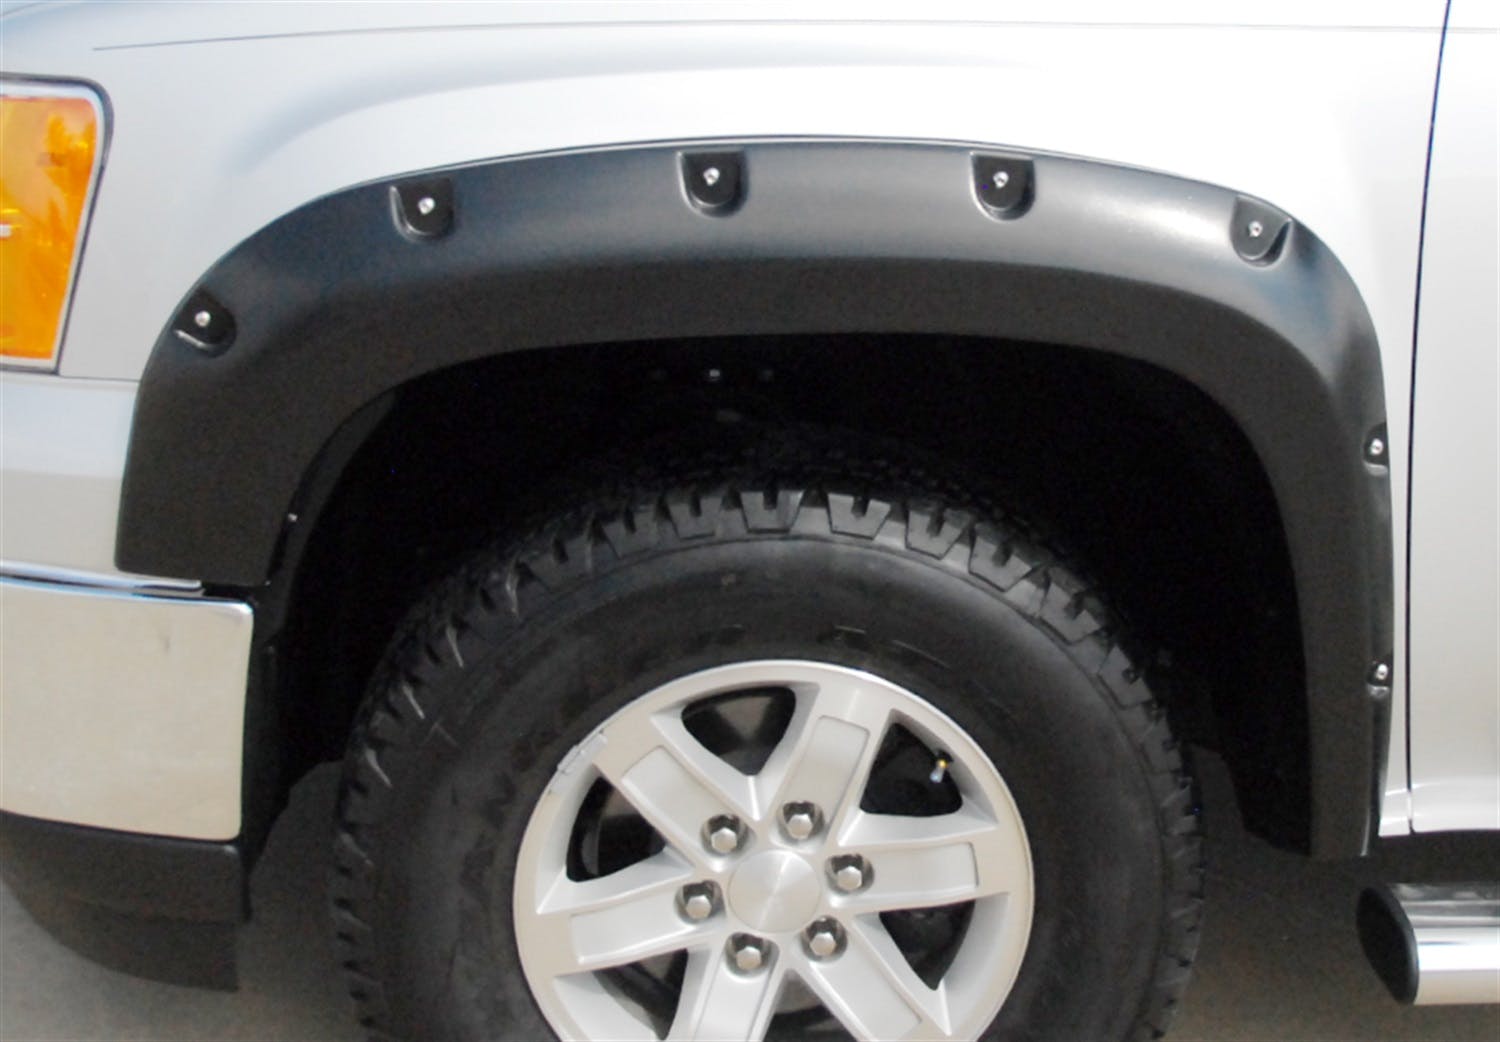 LUND RX109SA RX-Style Fender Flares 2pc Smooth RX-RIVET STYLE 2PC SMOOTH